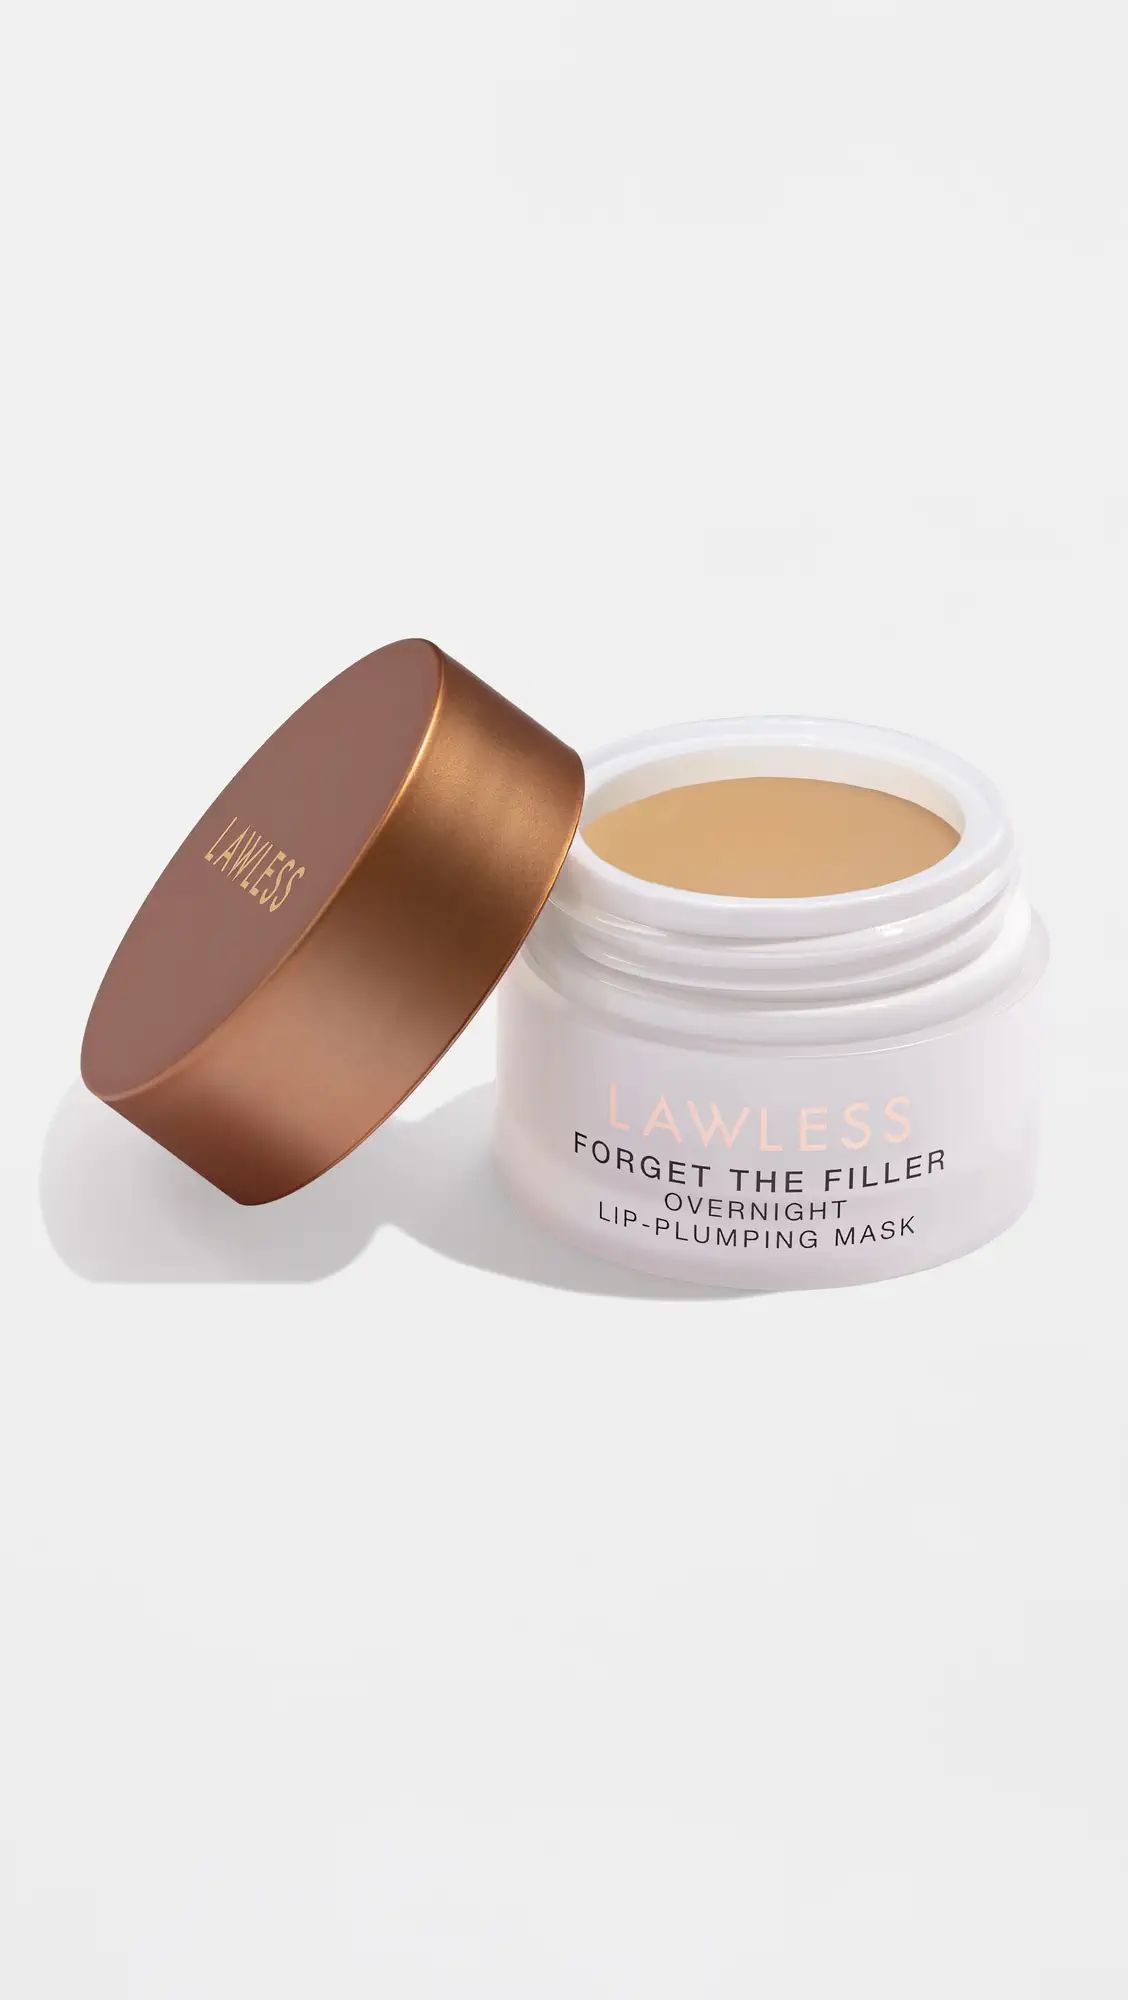 LAWLESS Forget The Filler Overnight Lip Plumping | Shopbop | Shopbop